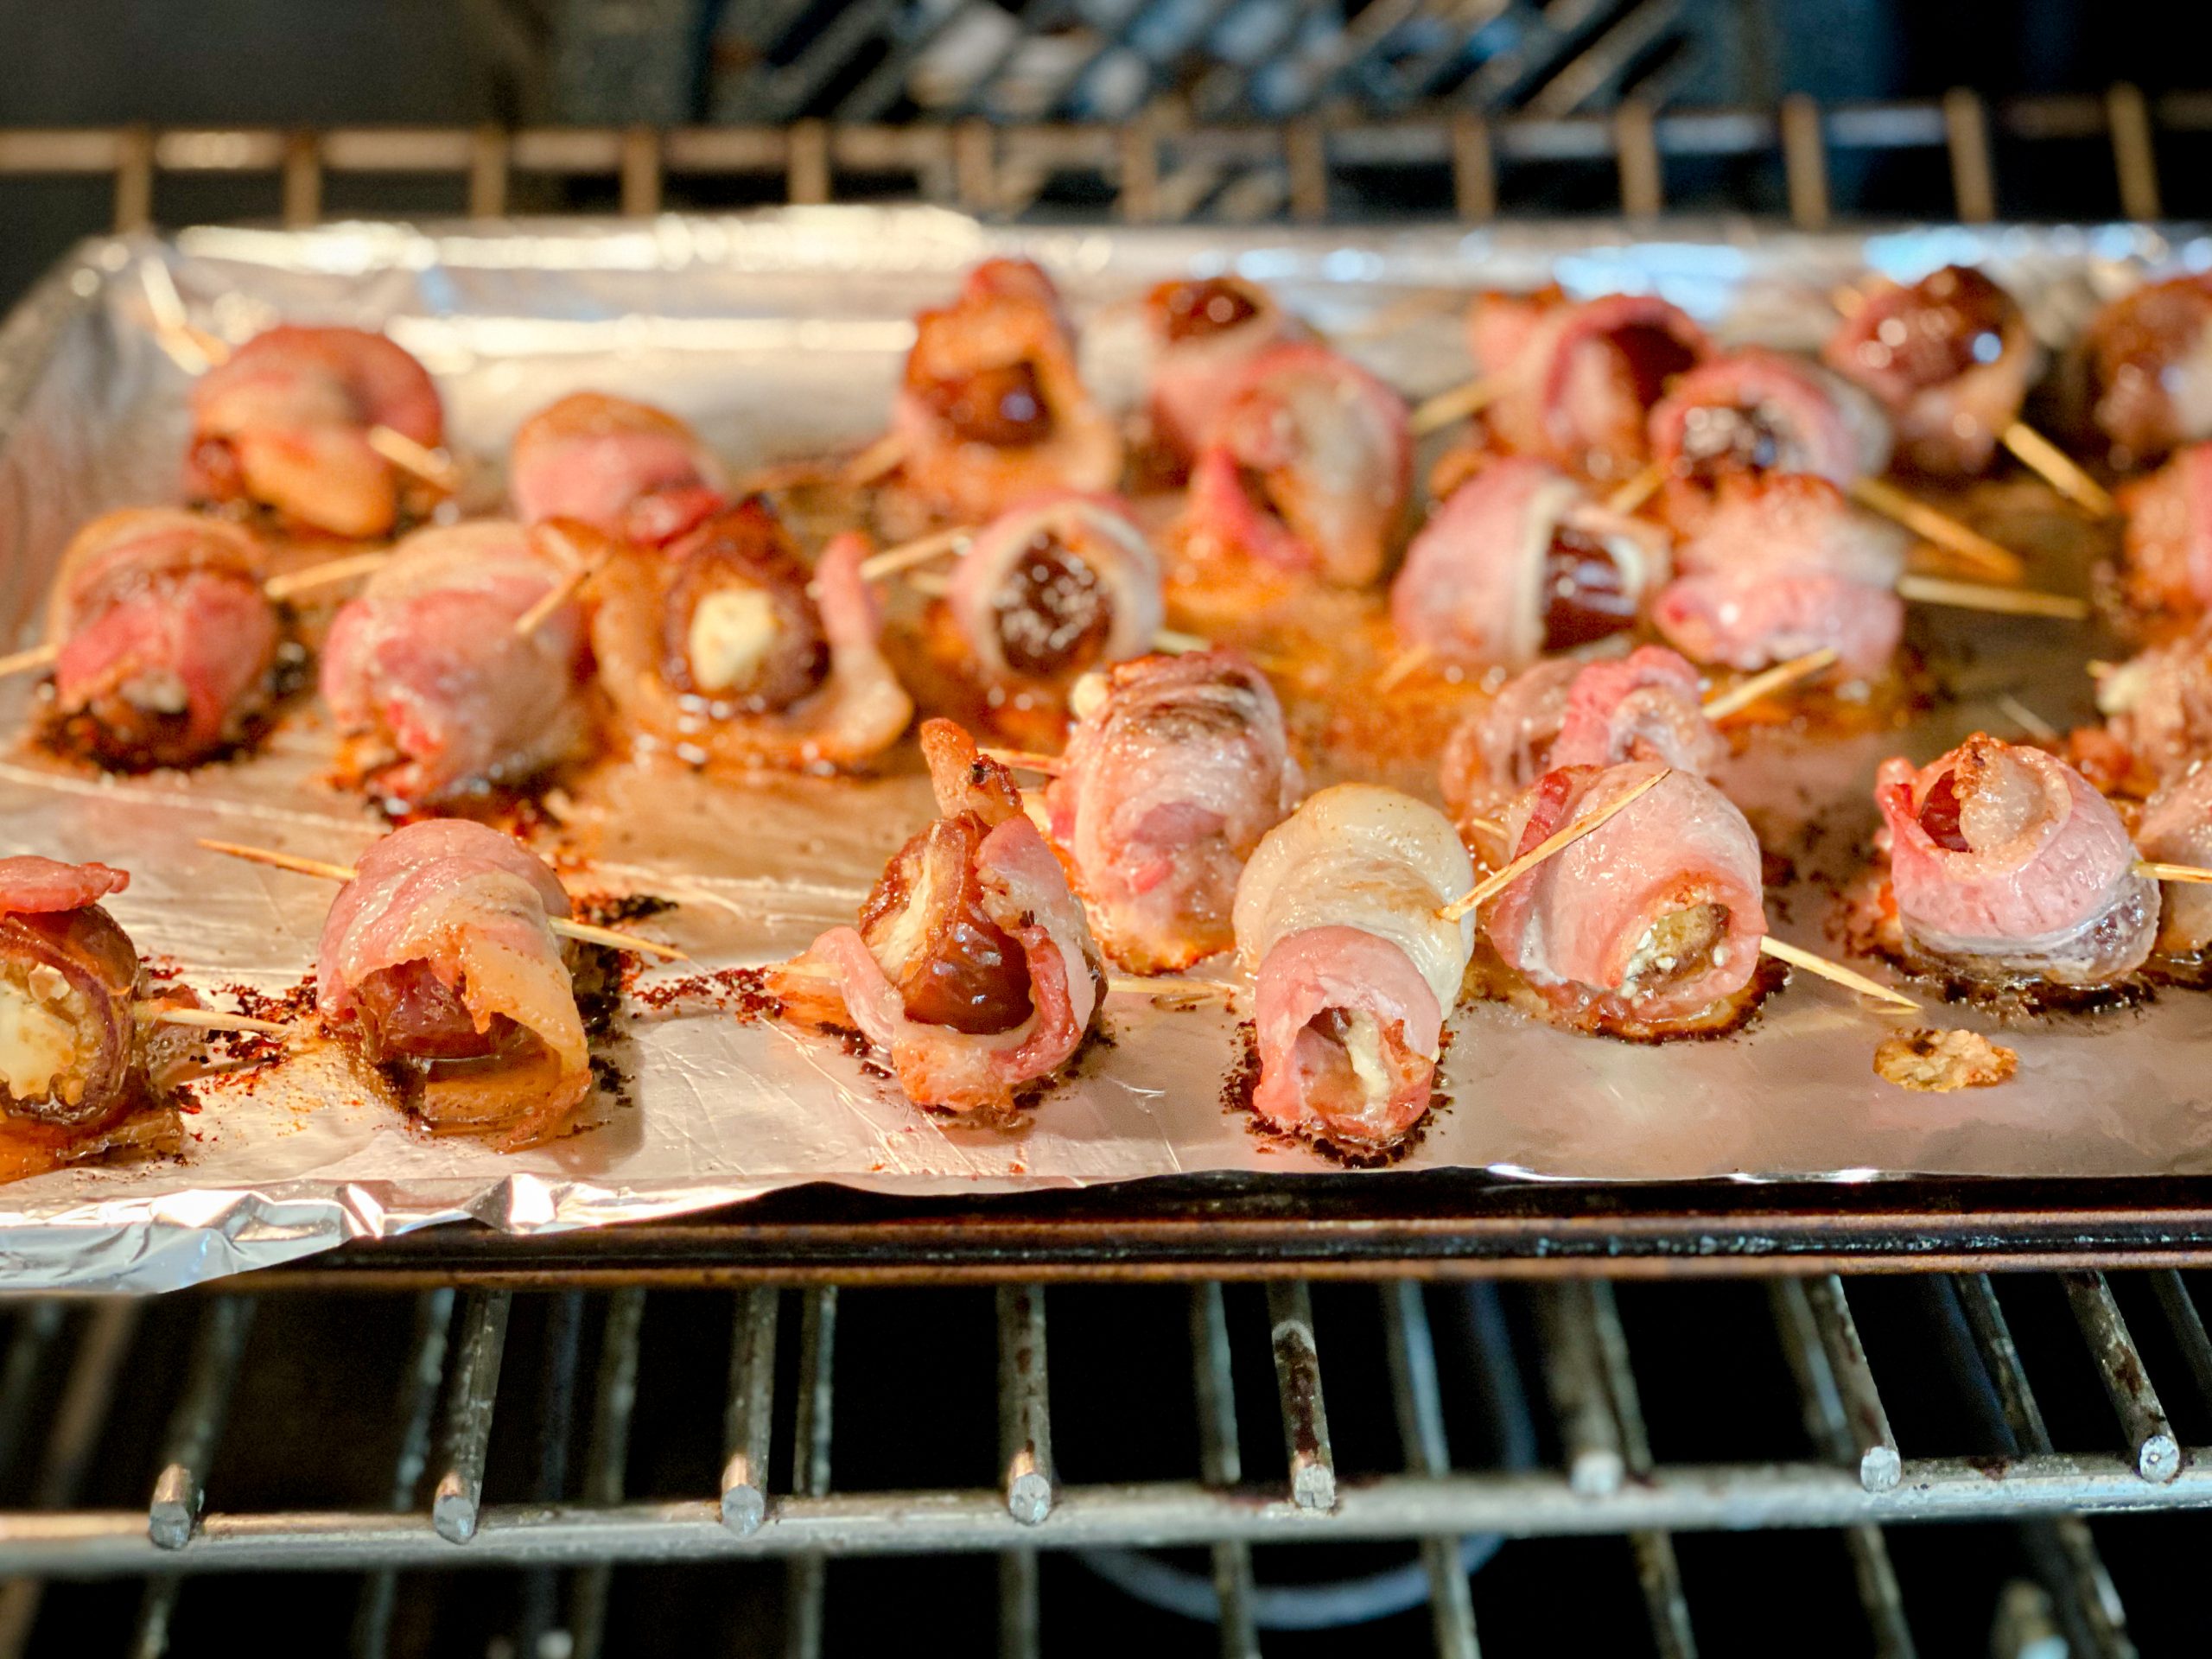 Halfway into the cooking process bacon wrapped dates